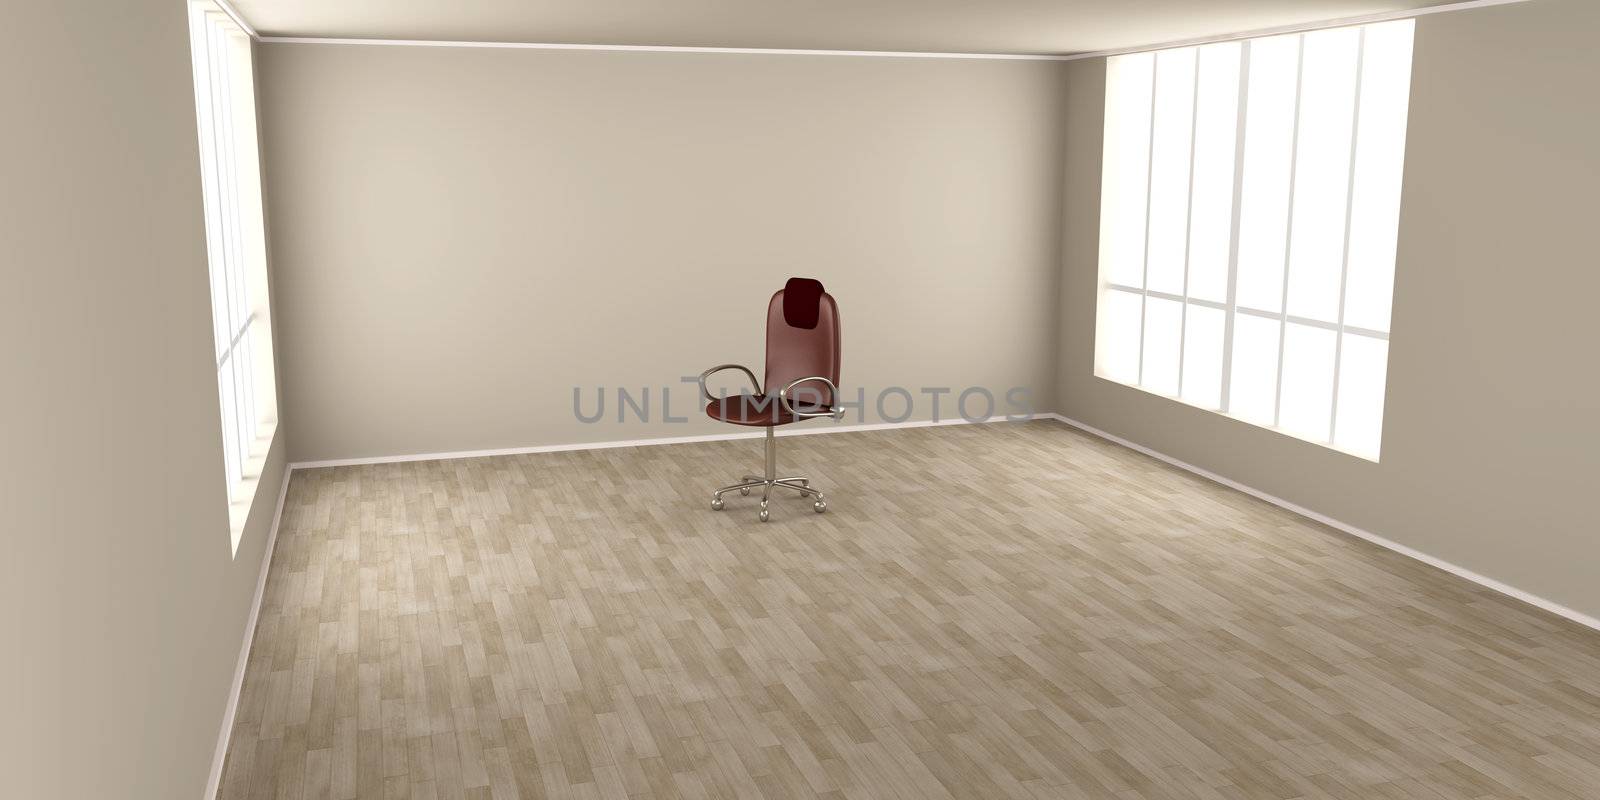 Office Chair in a empty room by Spectral